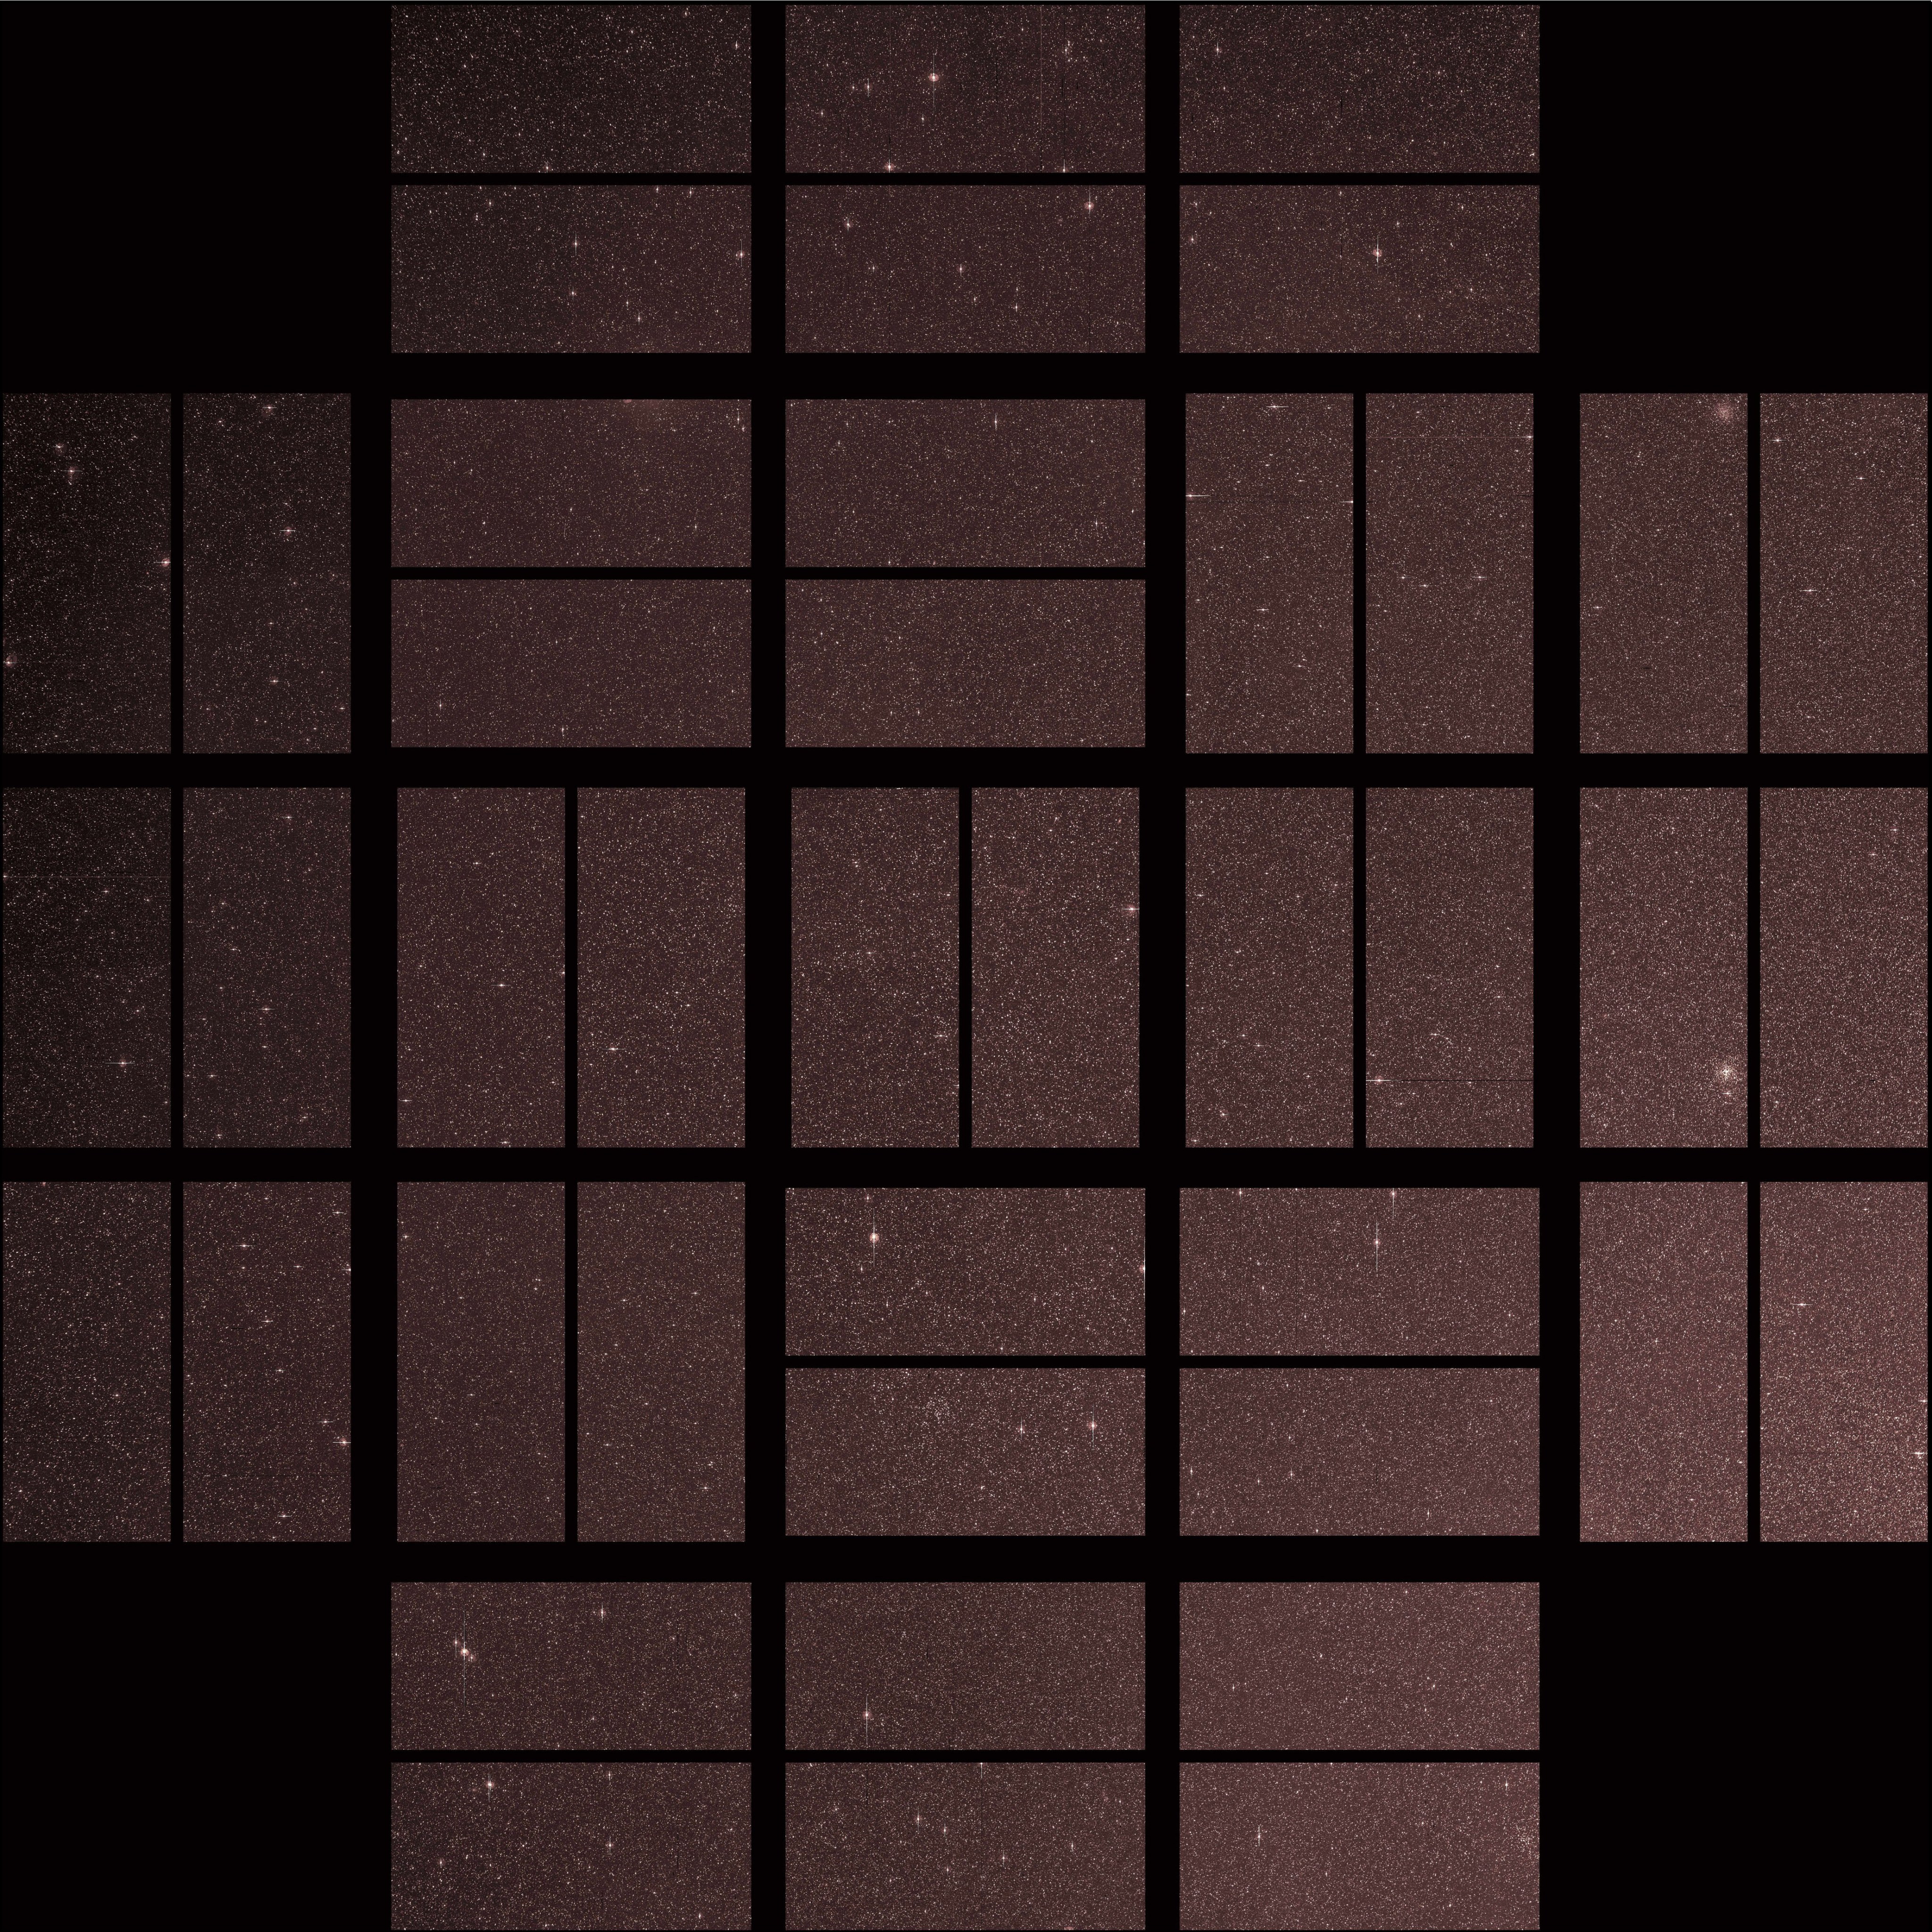 Grid of brick-colored rectangles with stars in each showing Kepler's first light image